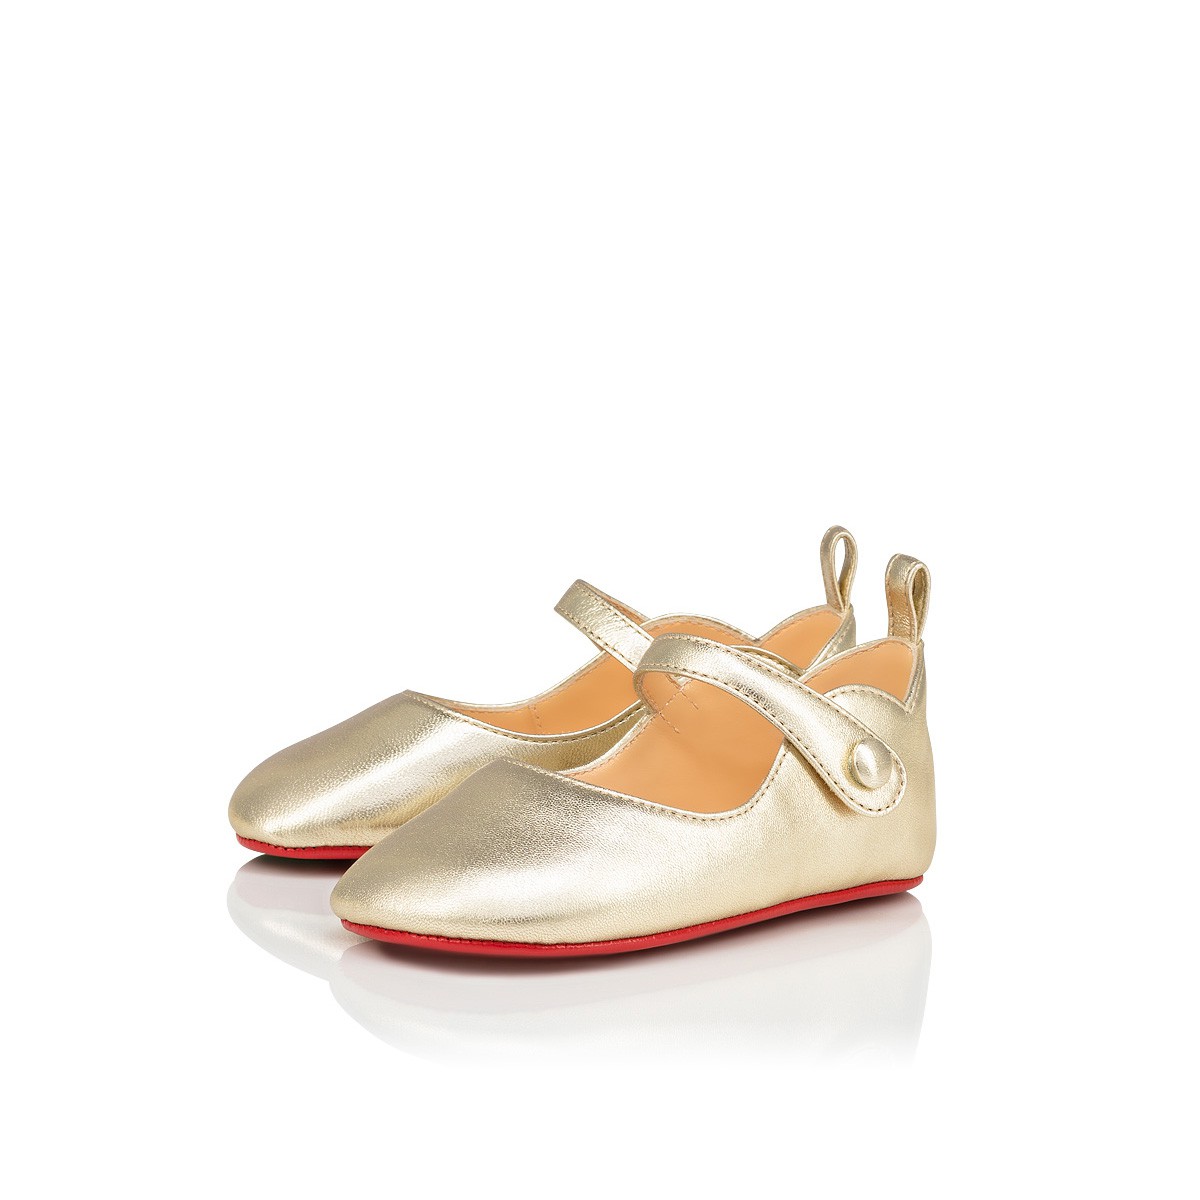 Baby Love Chick Gold 納帕皮- Unisex Kid Shoes - Christian Louboutin